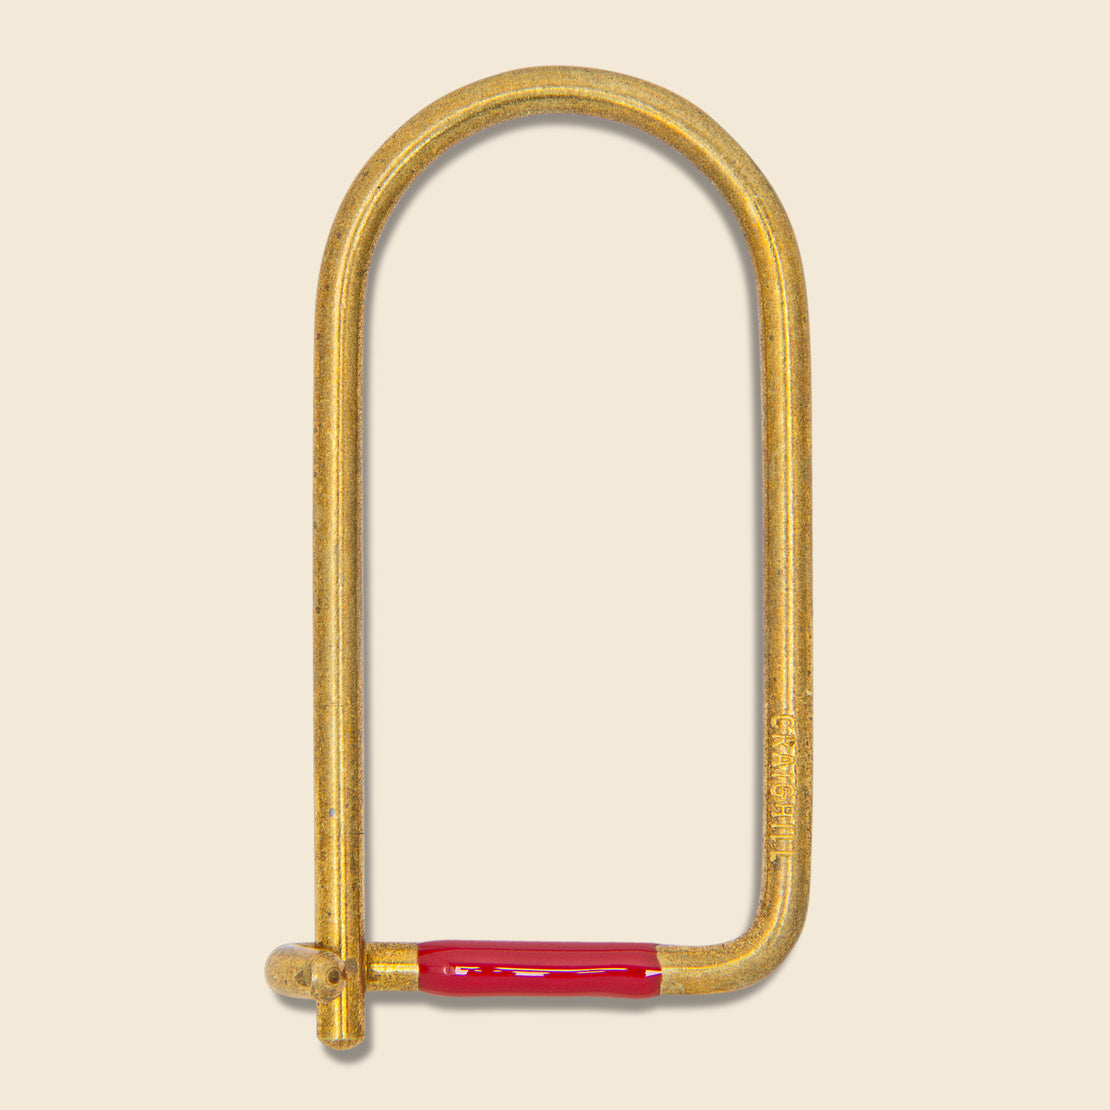 Craighill Wilson Enameled Key Ring - Brass/Red